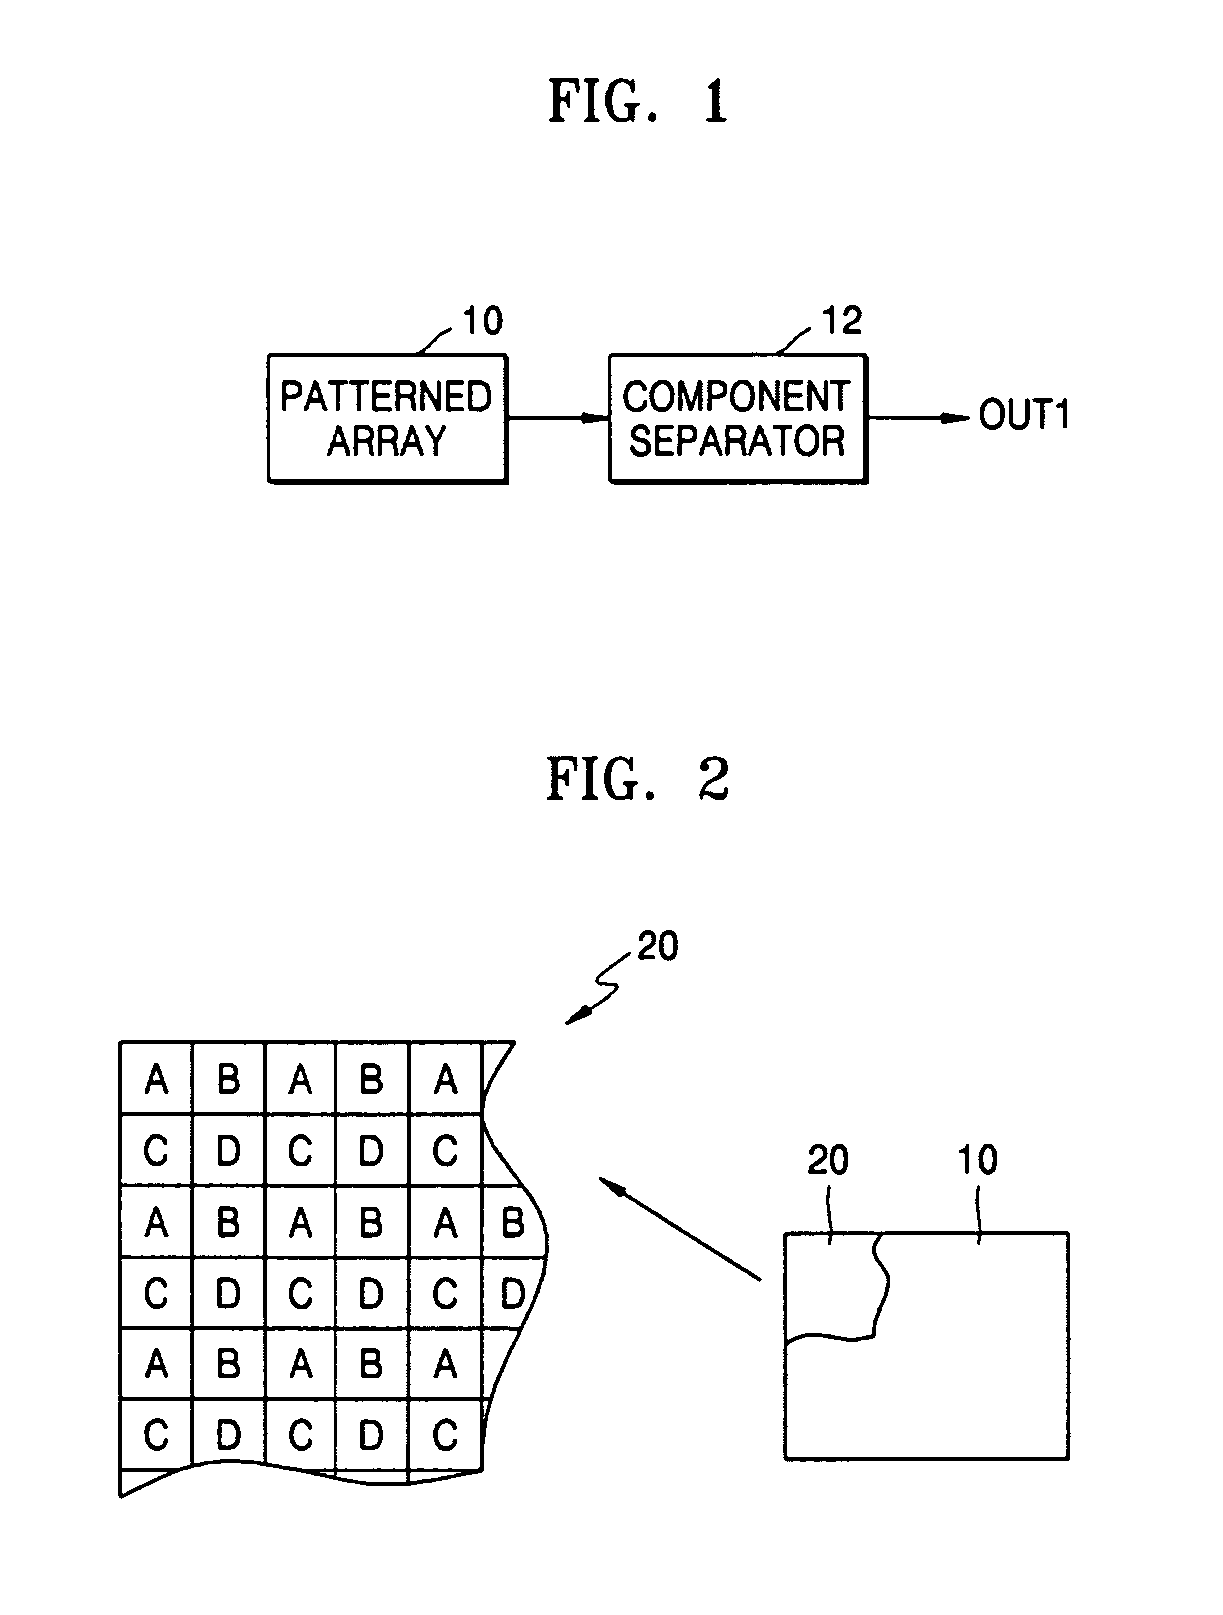 Imaging apparatus, medium, and method using infrared rays with image discrimination